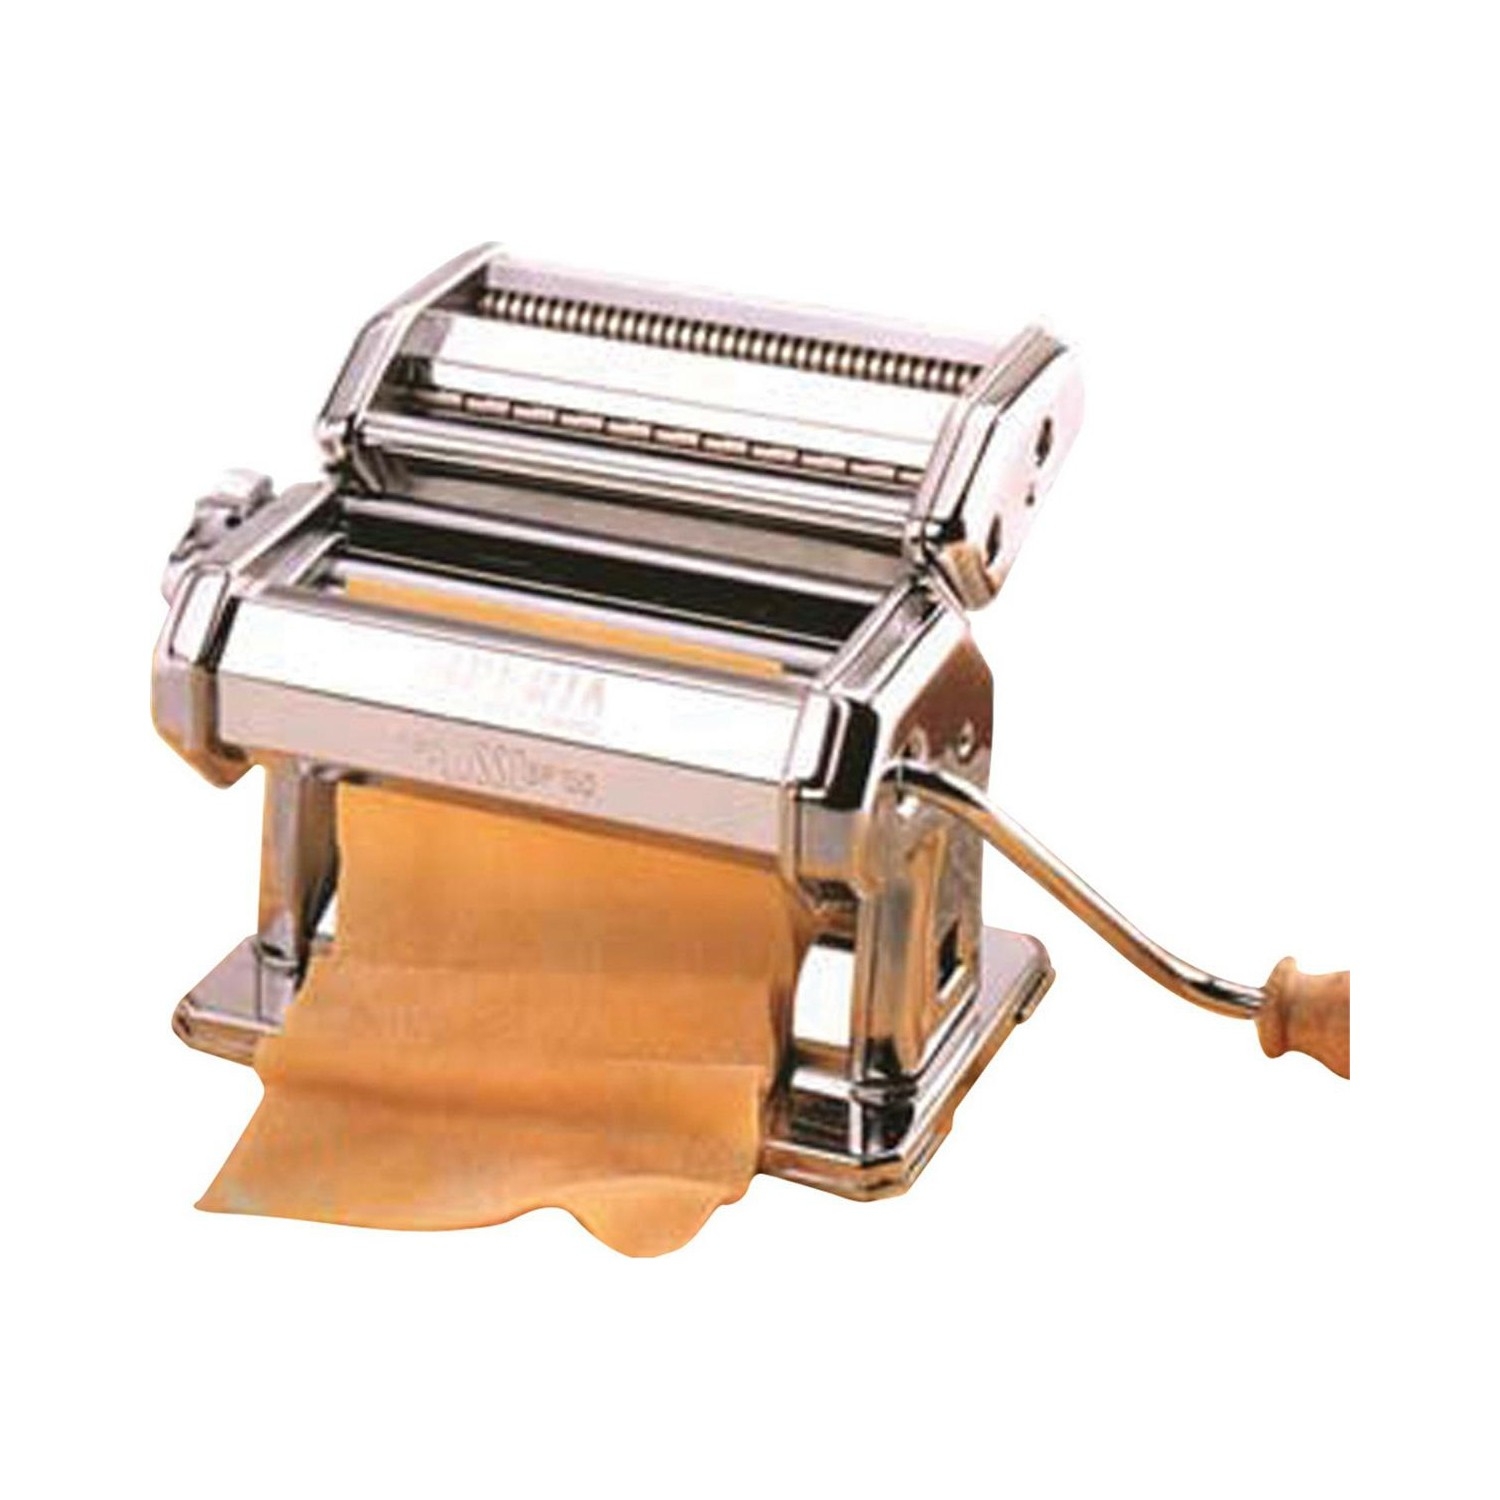 Imperia Home Pasta Machine with Optional Attachments